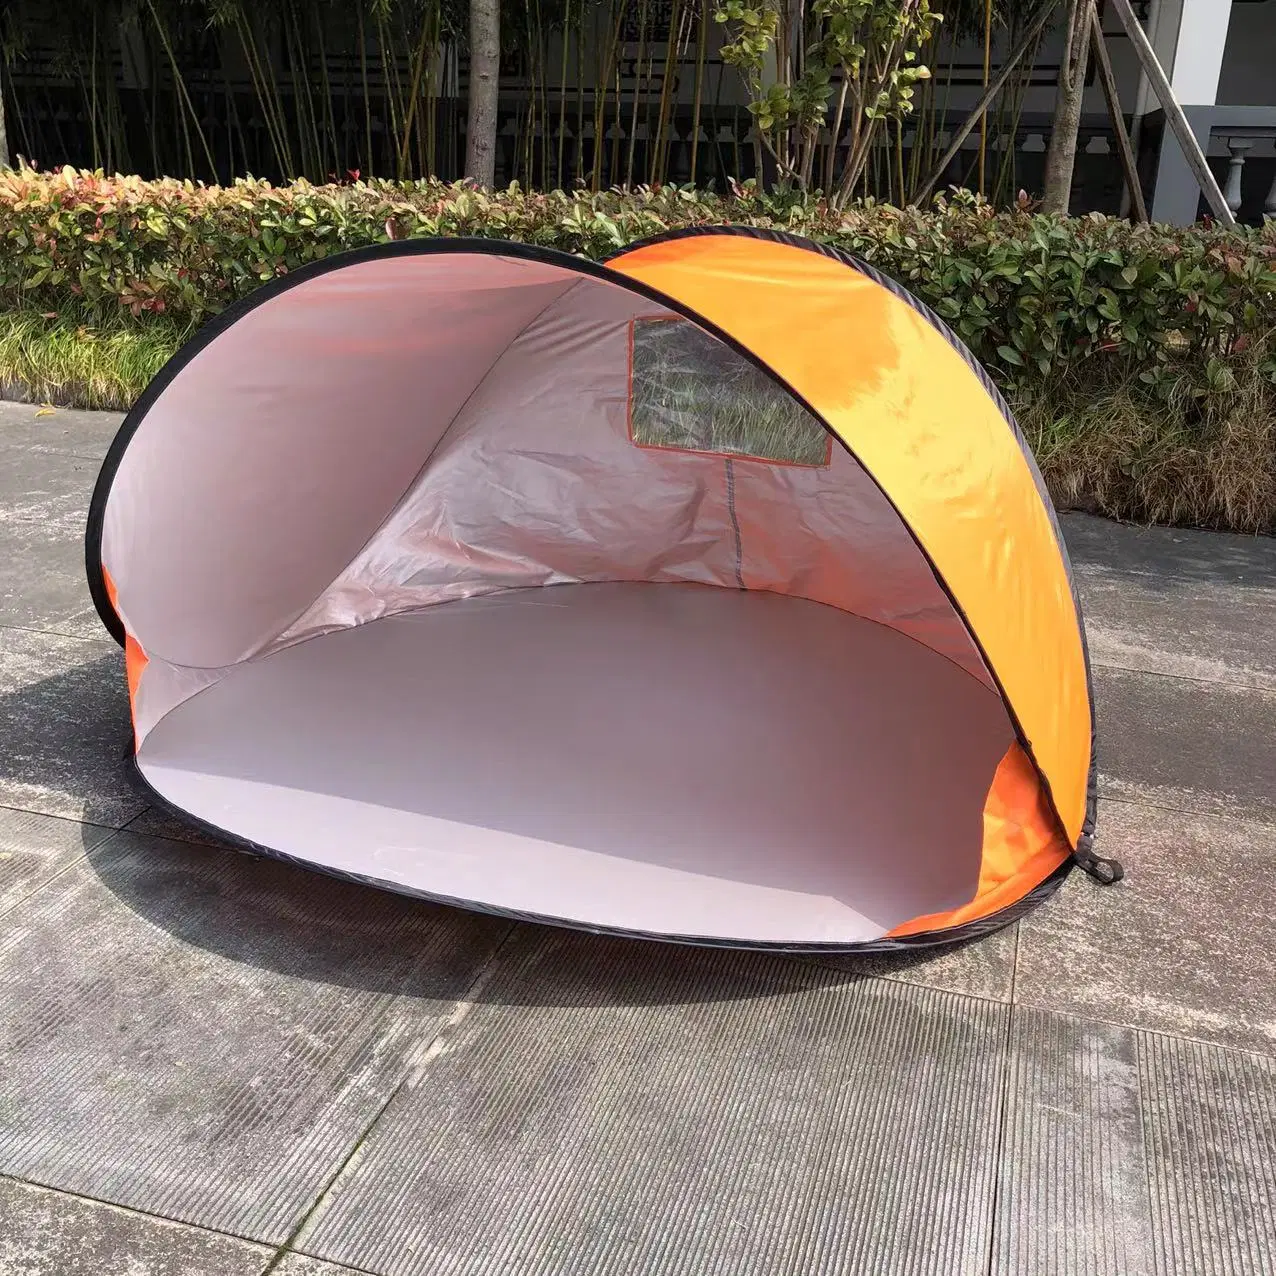 1-2 Persons Outdoor Beach Shelter Sun Shade Instant Camping Tent